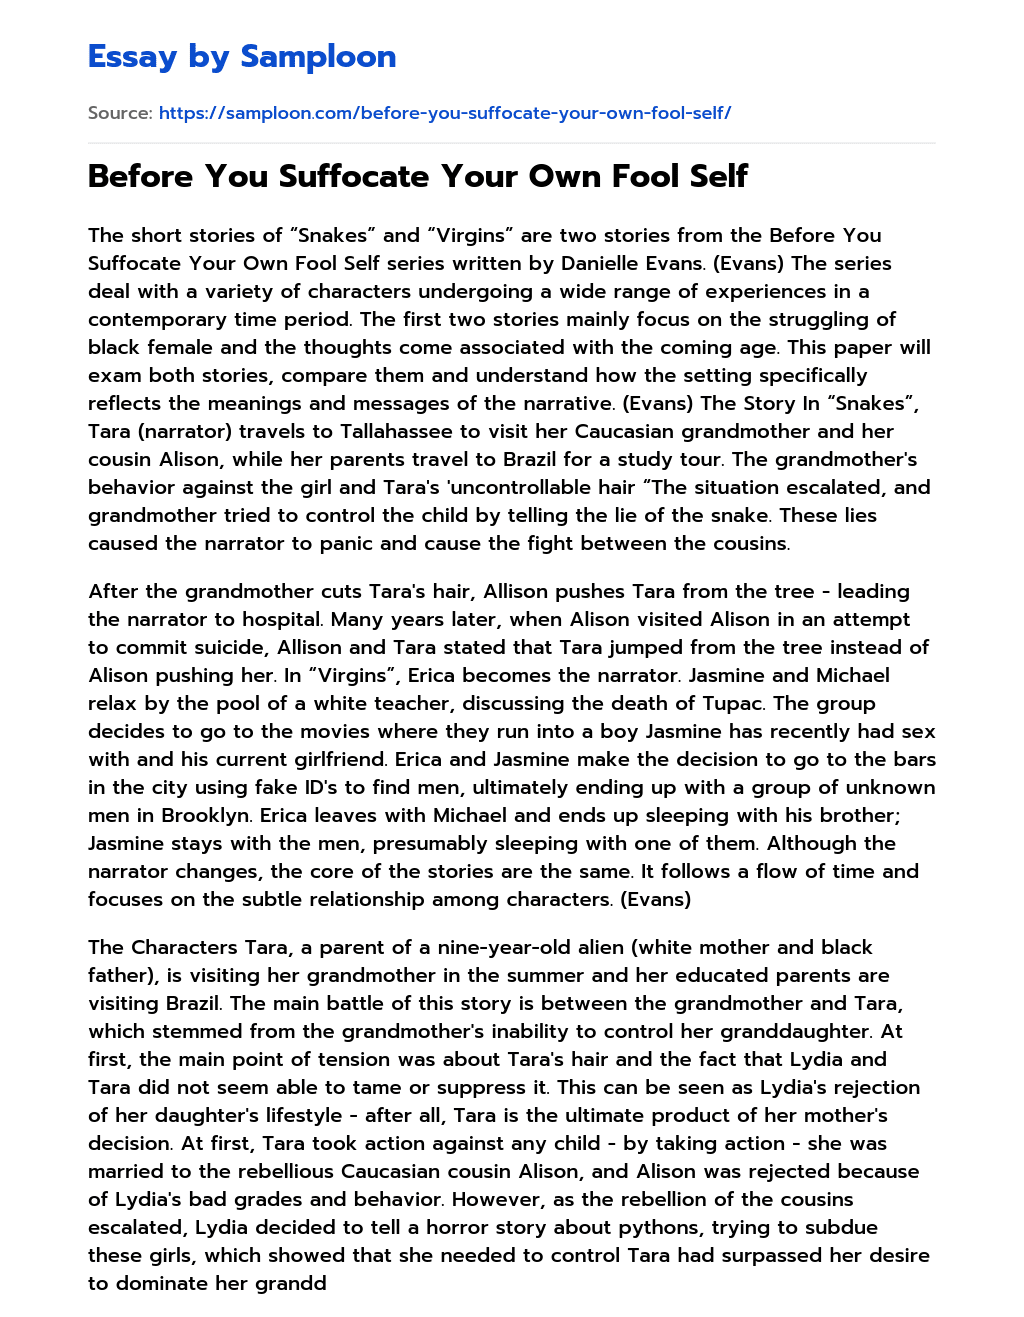 Before You Suffocate Your Own Fool Self Summary essay